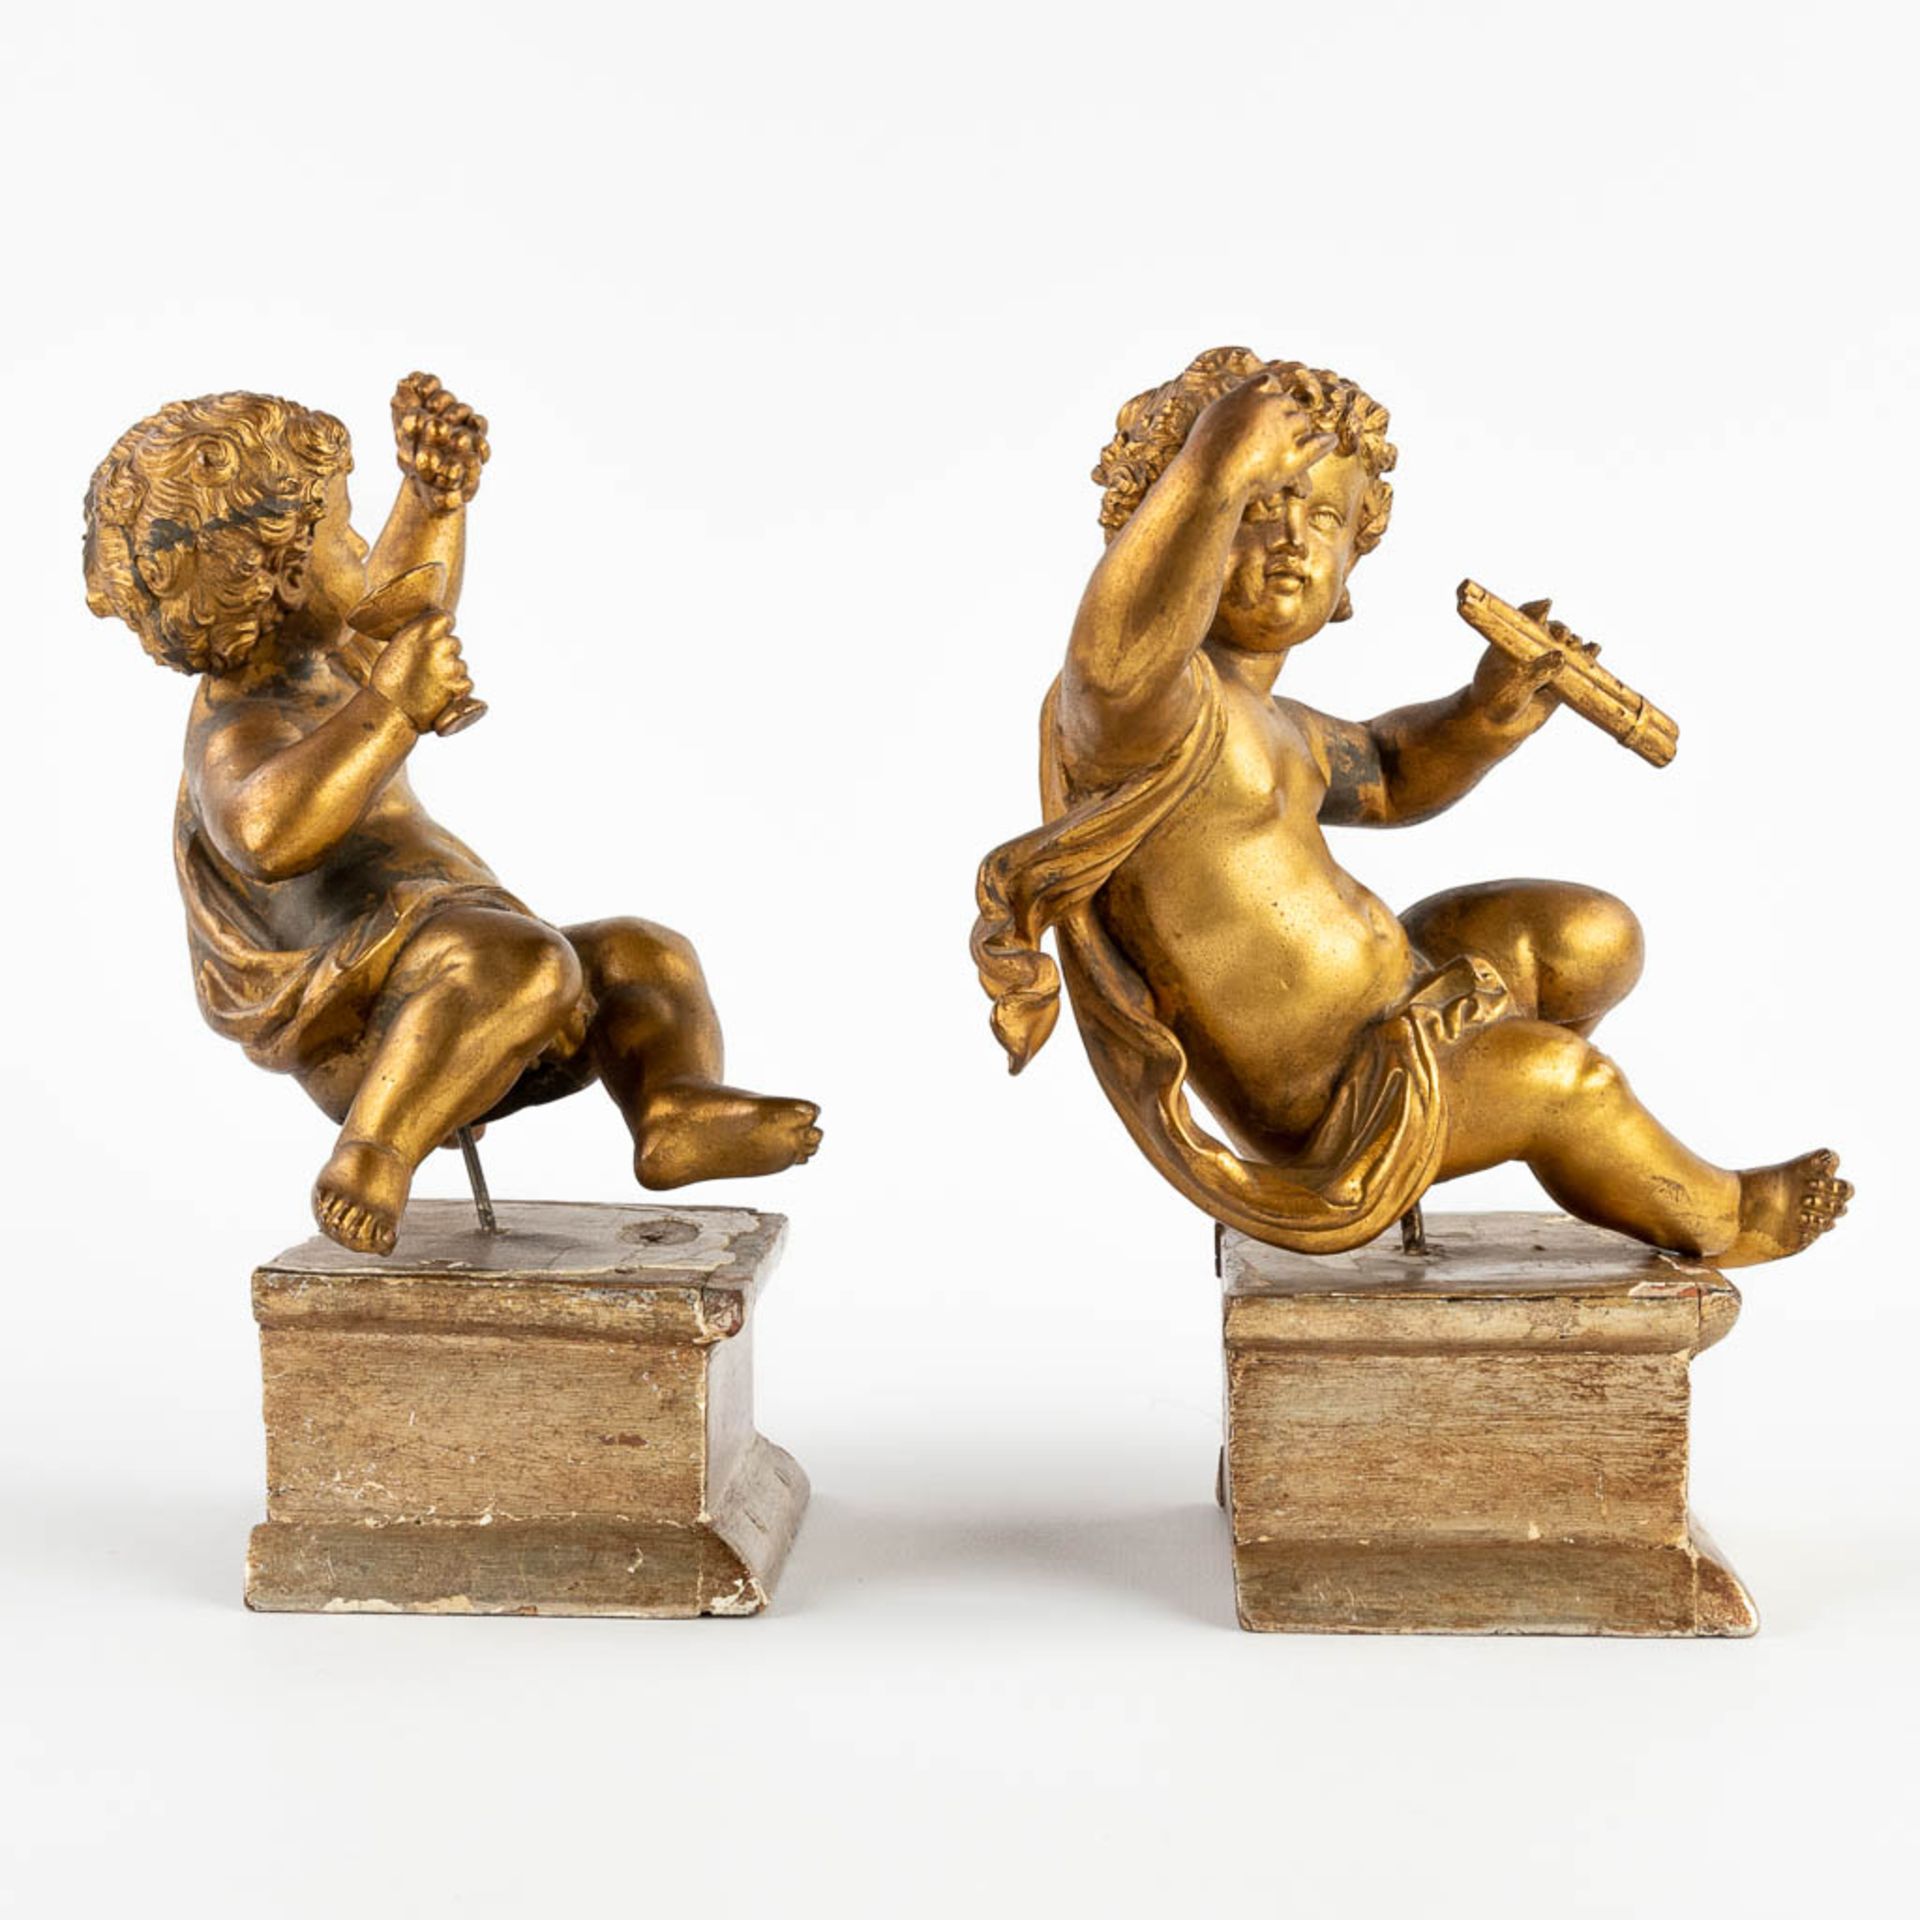 A pair of angels, gilt spelter and mounted on a wood base. 19th C. (W:12 x H:18 cm) - Image 4 of 14